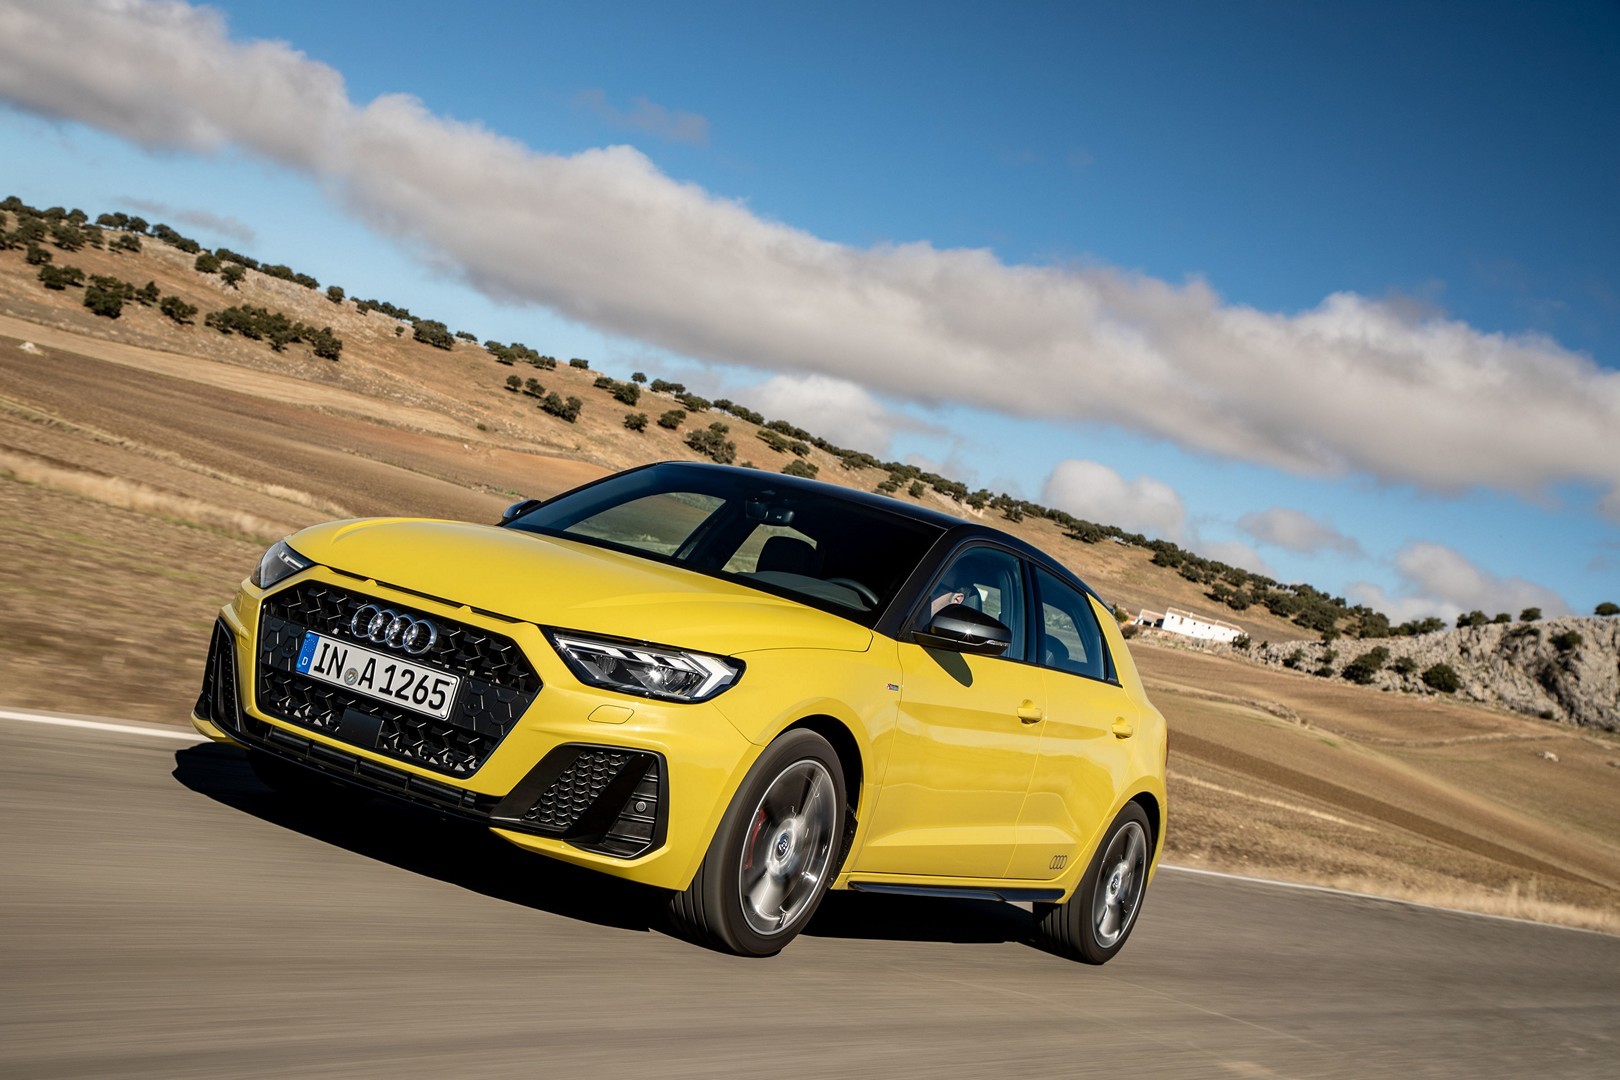 New Audi A1 Priced In The UK From 18,540 GBP autoevolution